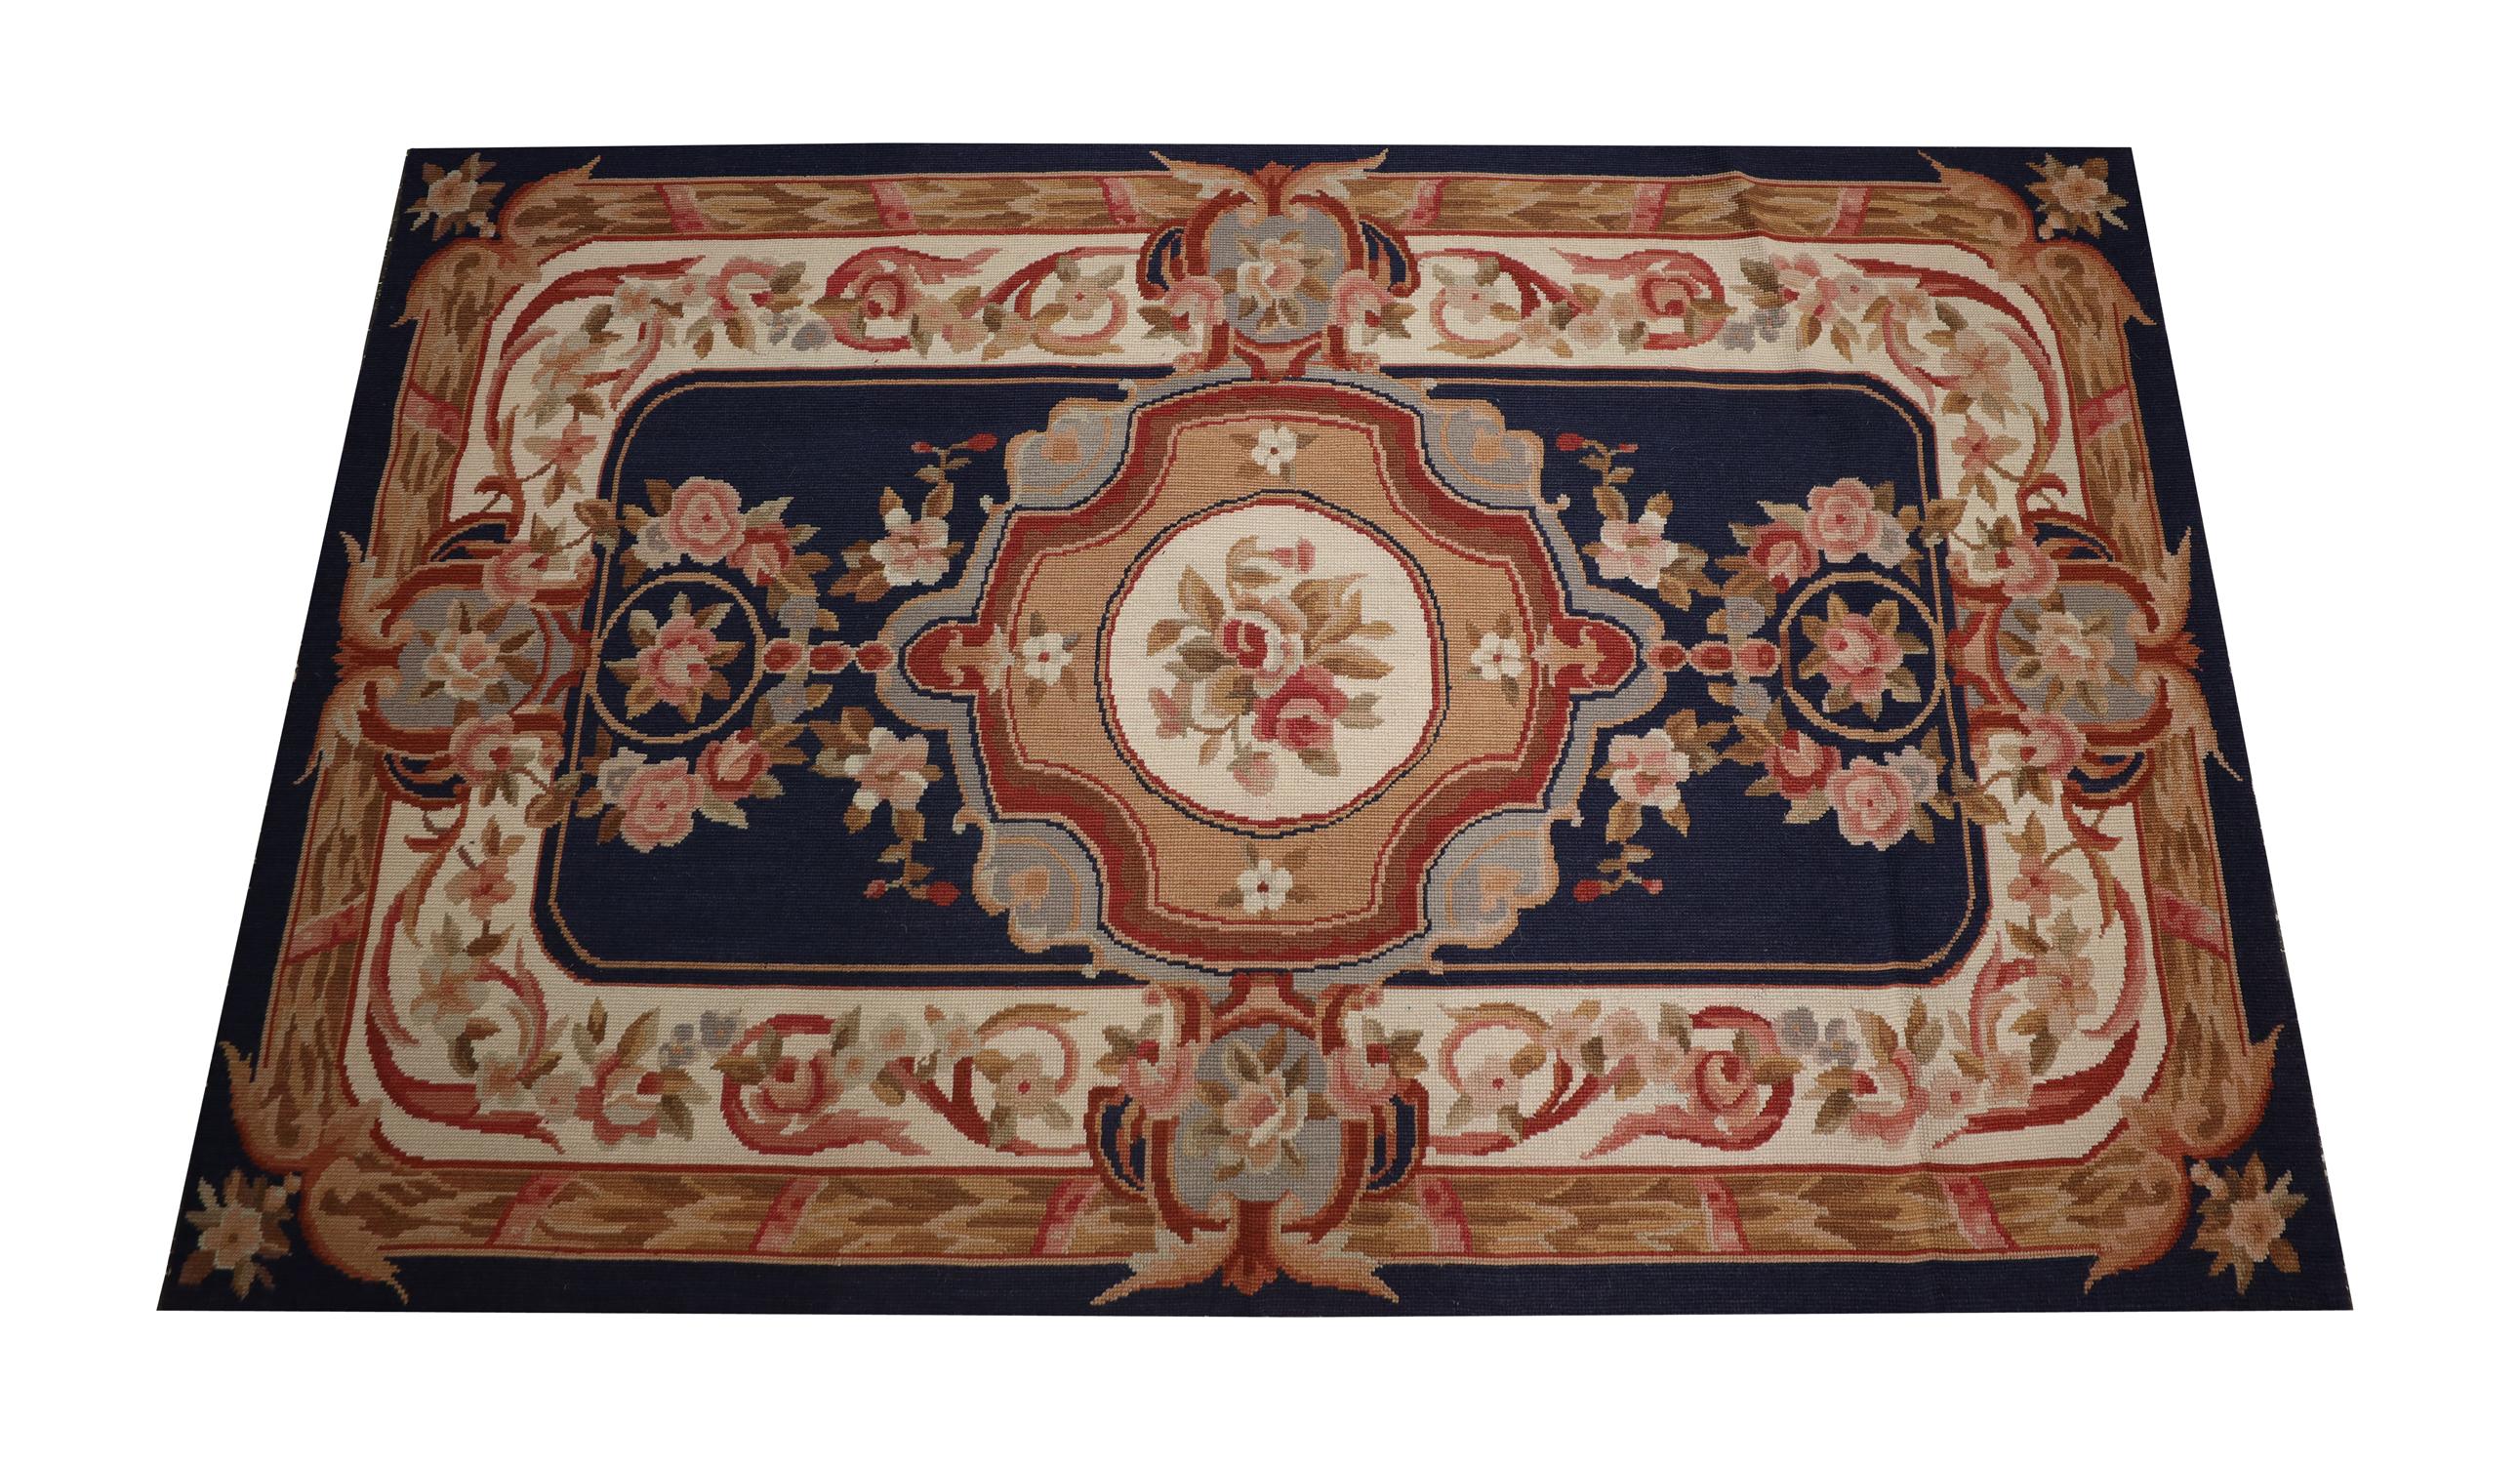 Beautifully hand-woven, this needlepoint rug is sure to make the perfect accent for any room. The design features a traditional colour palette of deep blue beige and cream with pink accents that make up the flower details. Both the design and